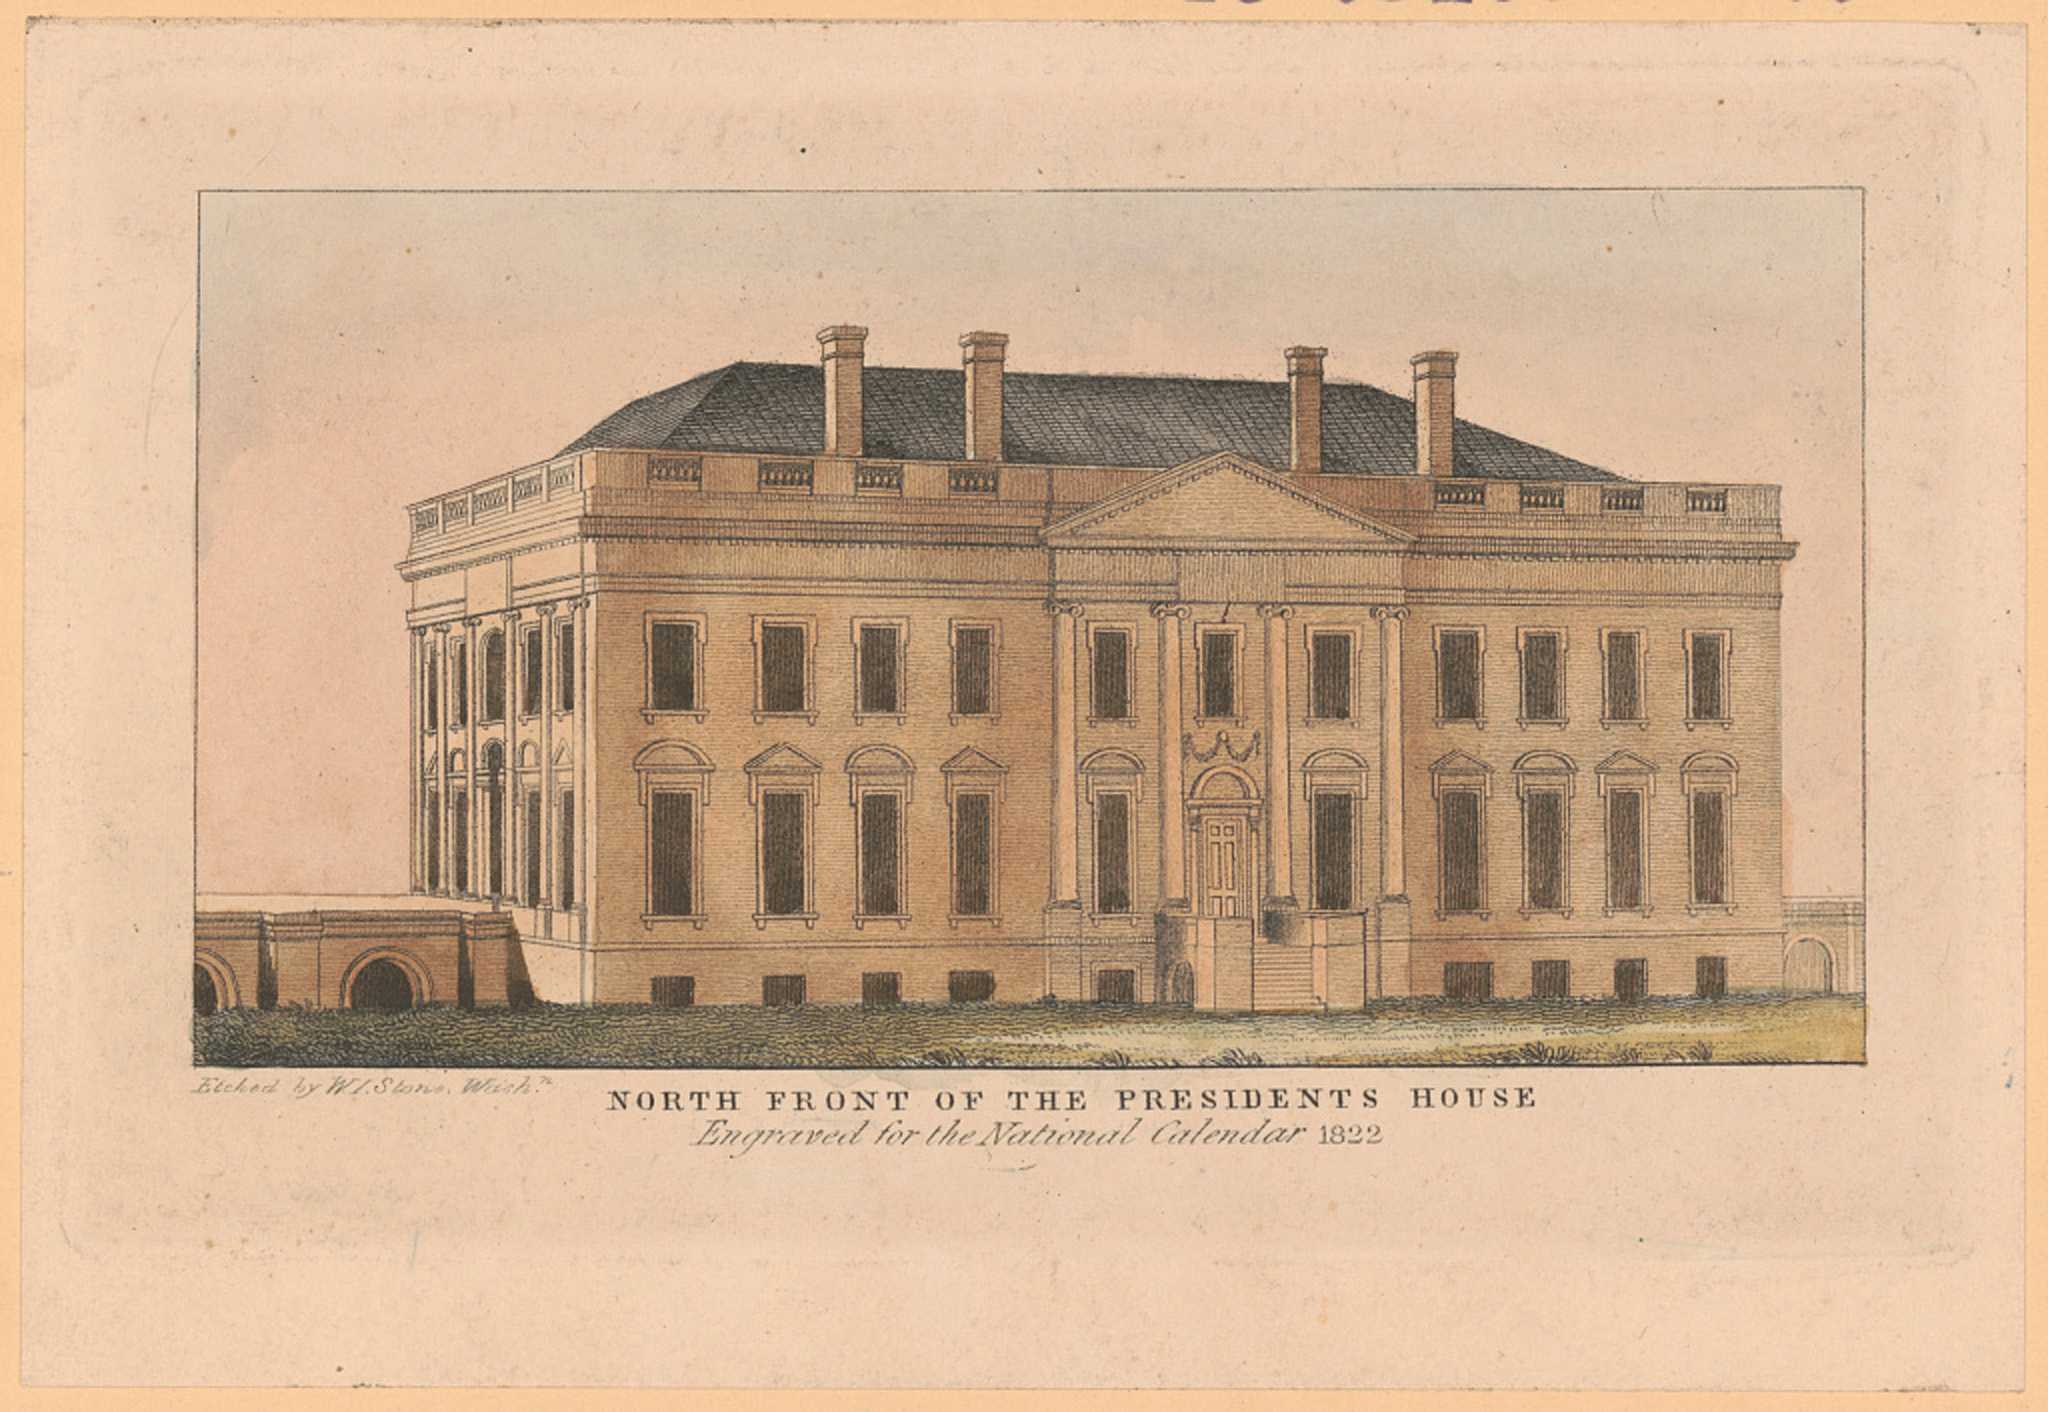 Illustration of the north front of the President's house